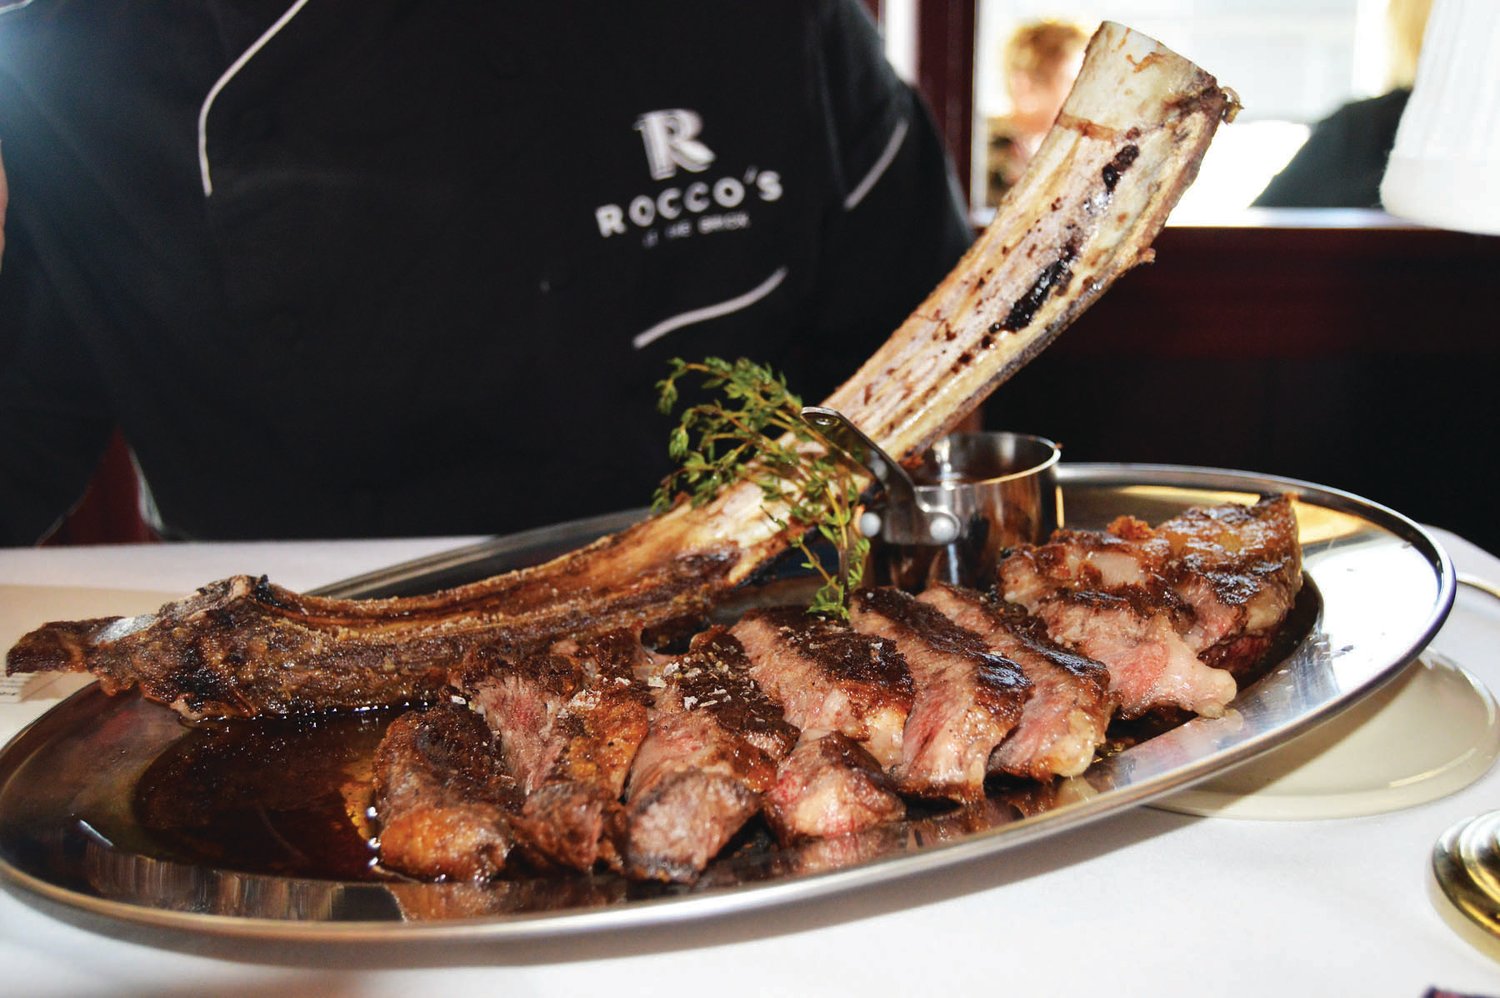 Giving the gift of a dining out experience is easy with a restaurant gift card. Here is a steak lover’s dream: a  tomahawk steak at Rocco’s at the Brick in Newtown. Photo by Susan S. Yeske